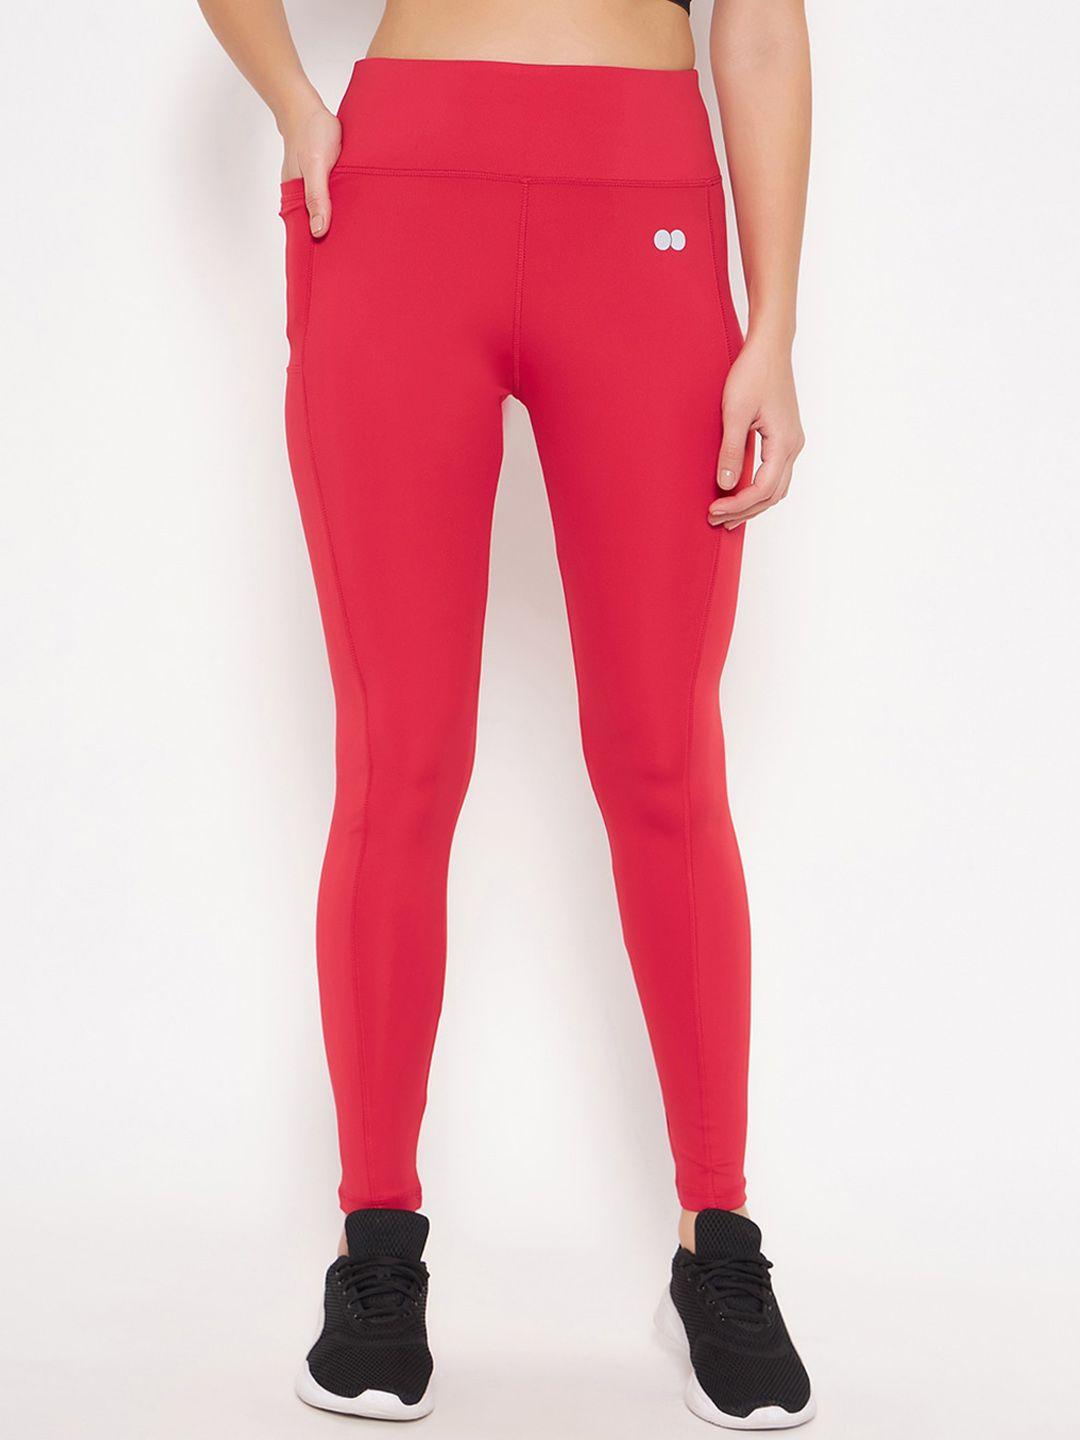 clovia-women-red-high-rise-slim-fit-rapid-dry-ankle-length-active-gym-tights